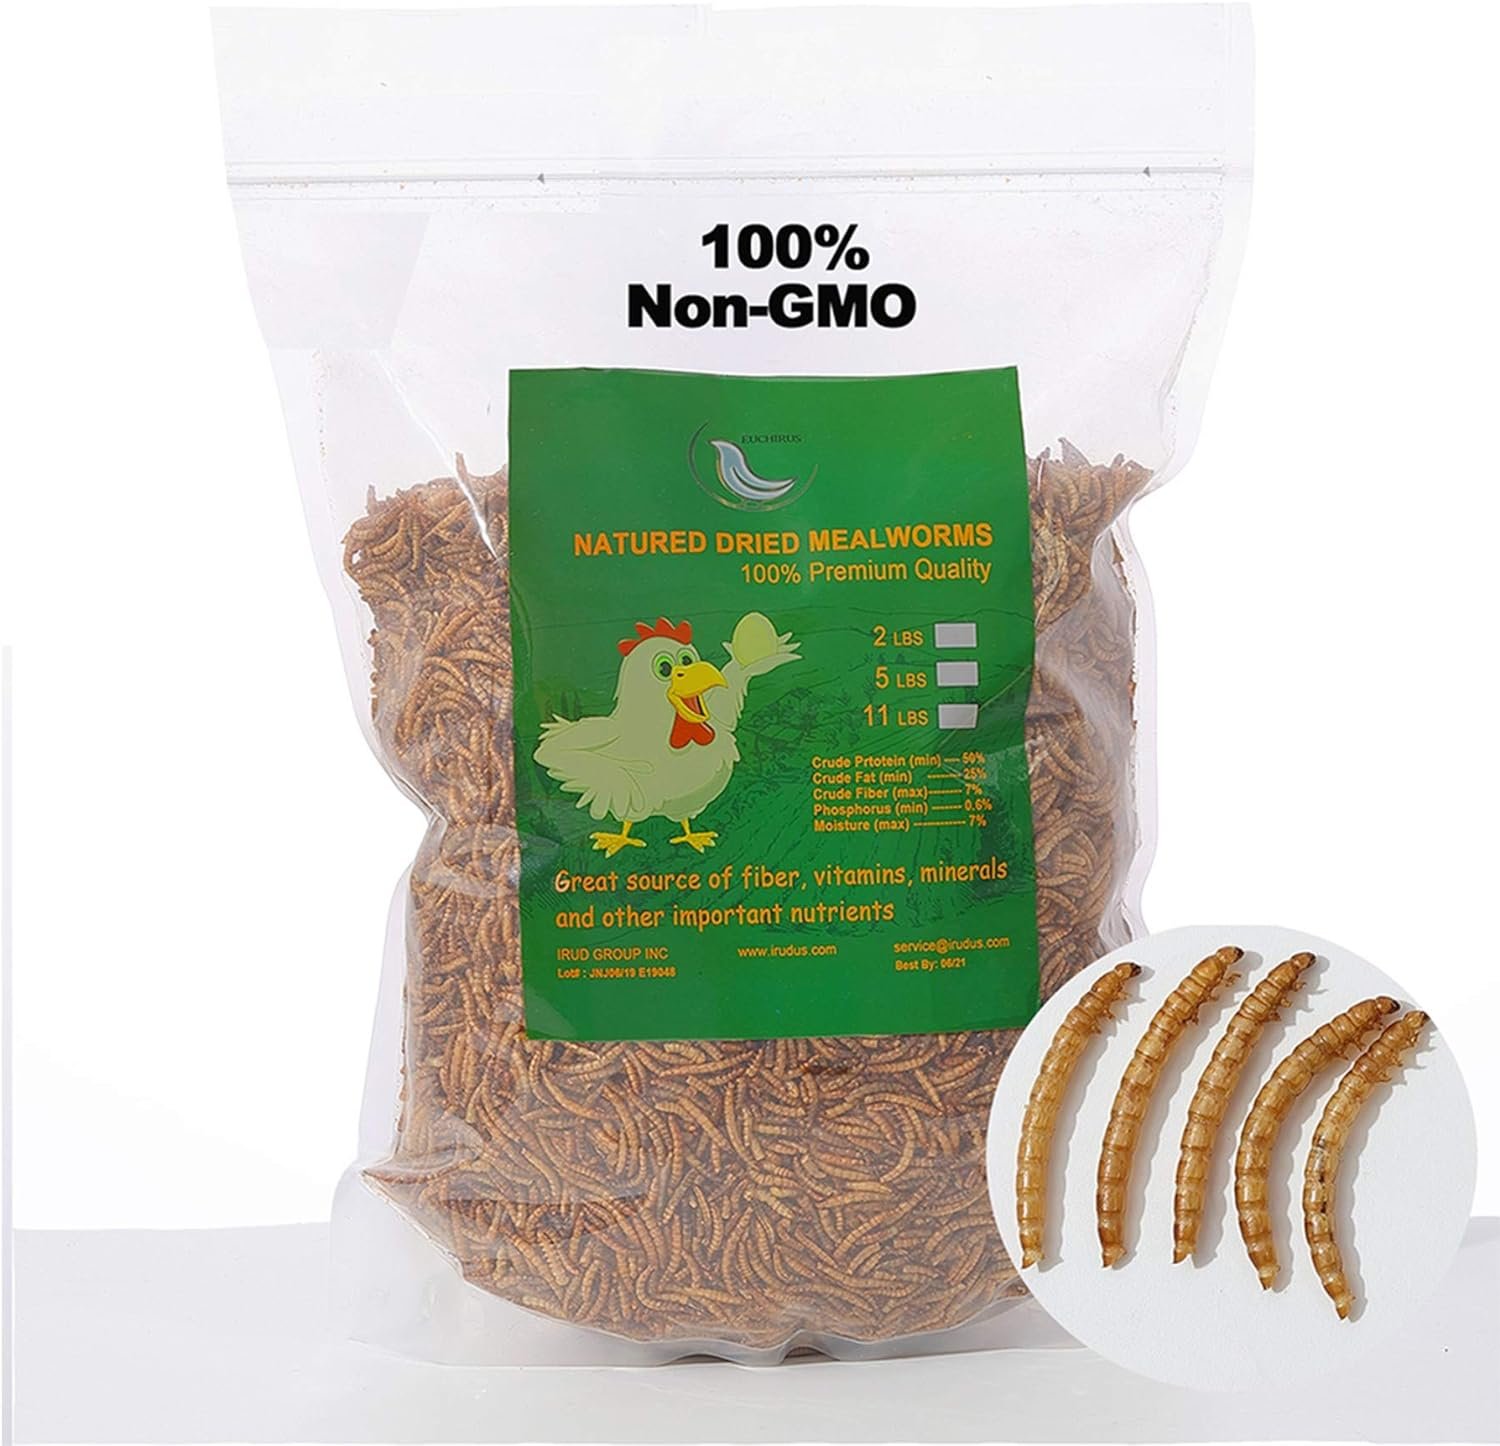 Black Soldier Fly Larvae Dried Mealworms for Chickens, 100% Natural Premium Quality Non-GMO, Treats for Birds Hedgehog Hamster Fish Reptile Turtles (6LB)